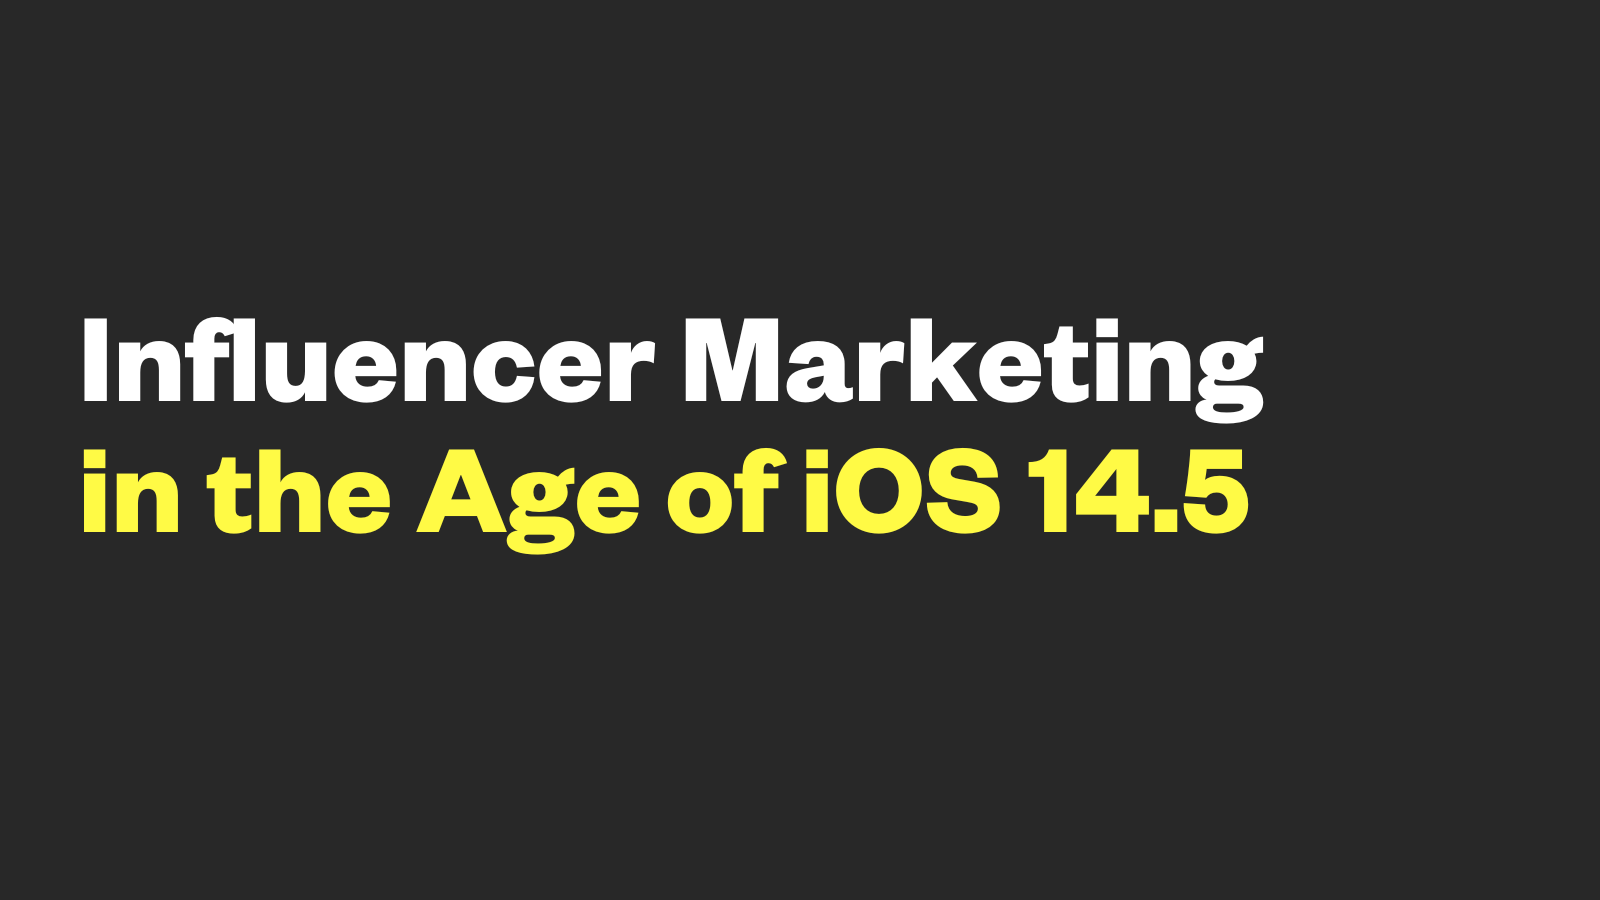 Influencer Marketing in the Age of iOS 14.5